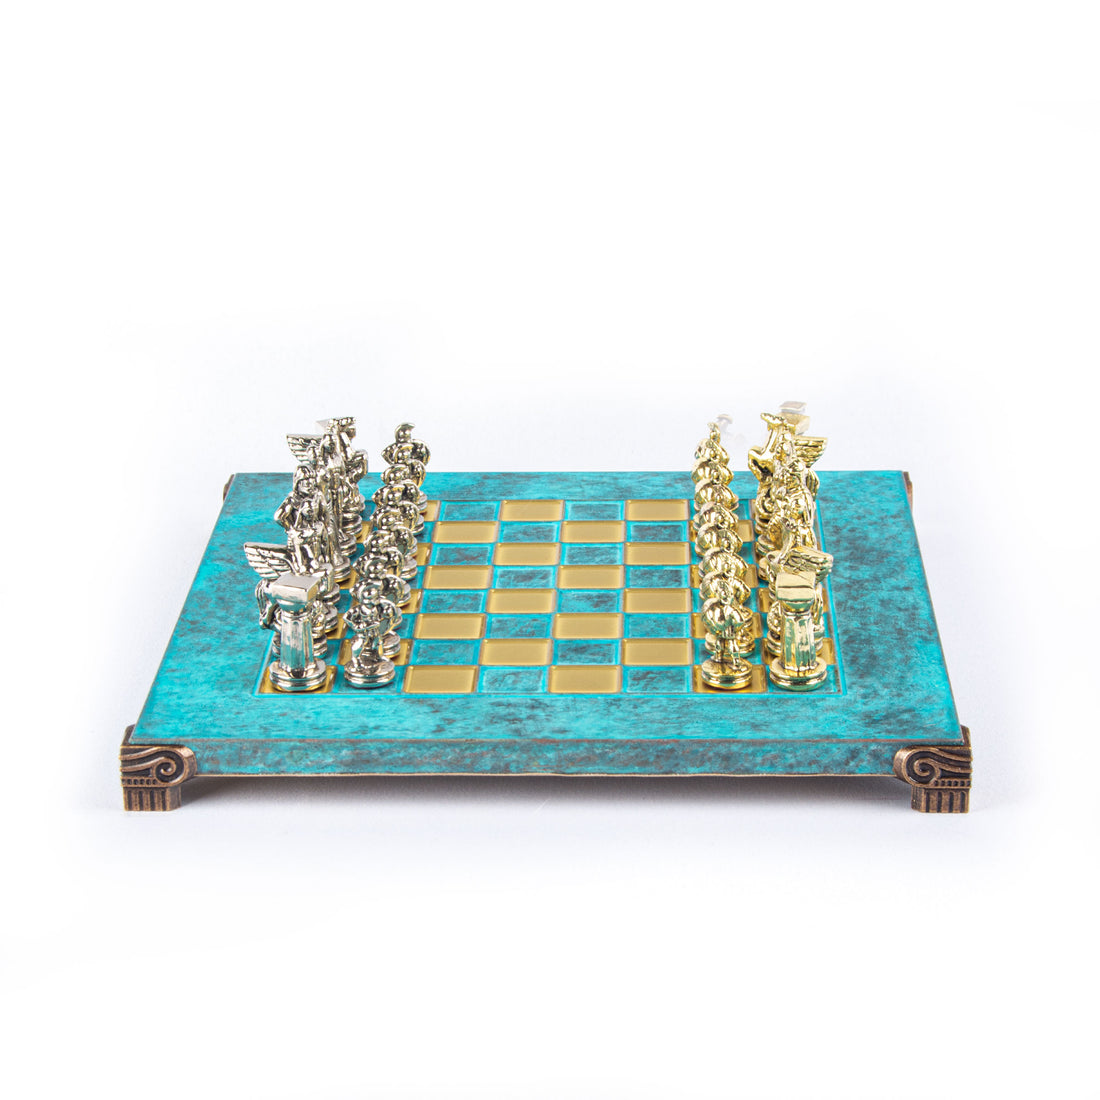 SPARTAN WARRIOR CHESS SET with gold/silver chessmen and bronze chessboard 28 x 28cm (Small) - Premium Chess from MANOPOULOS Chess & Backgammon - Just €168! Shop now at MANOPOULOS Chess & Backgammon